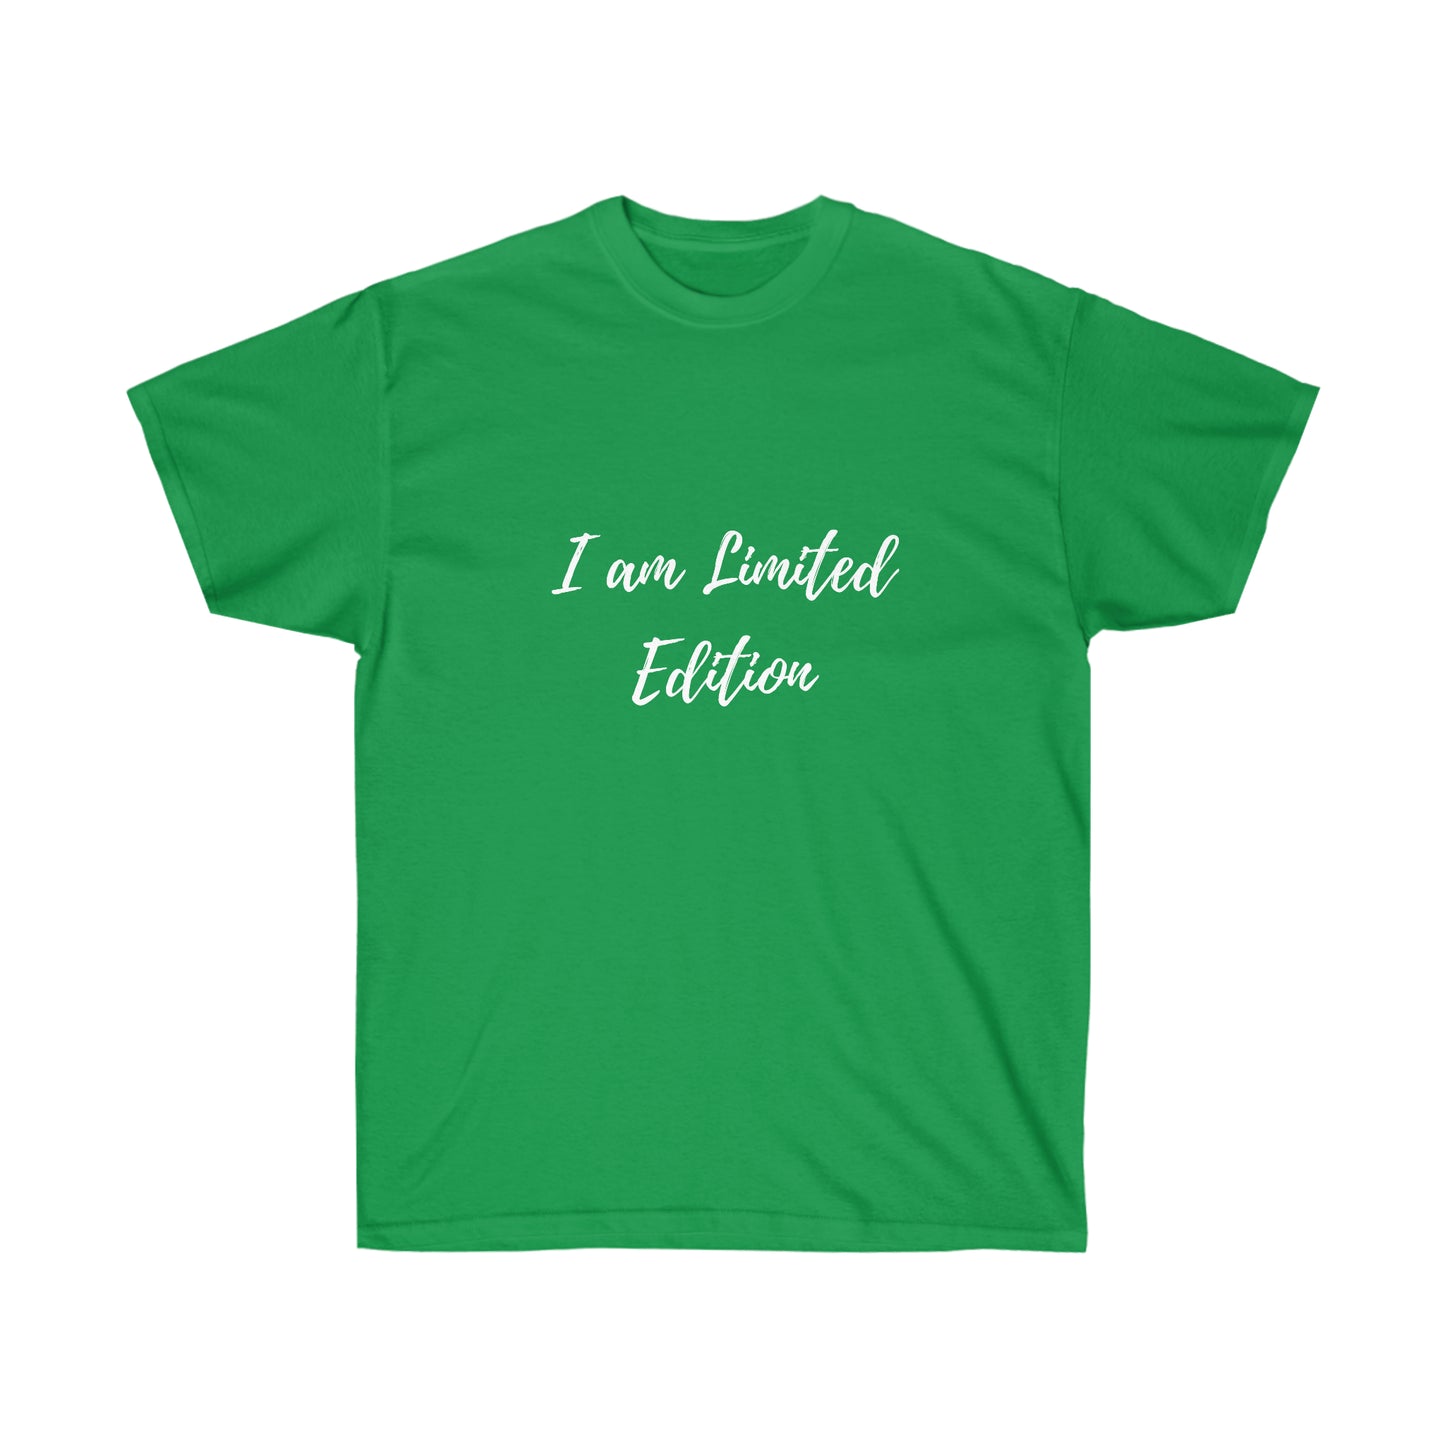 I am limited edition | Tee